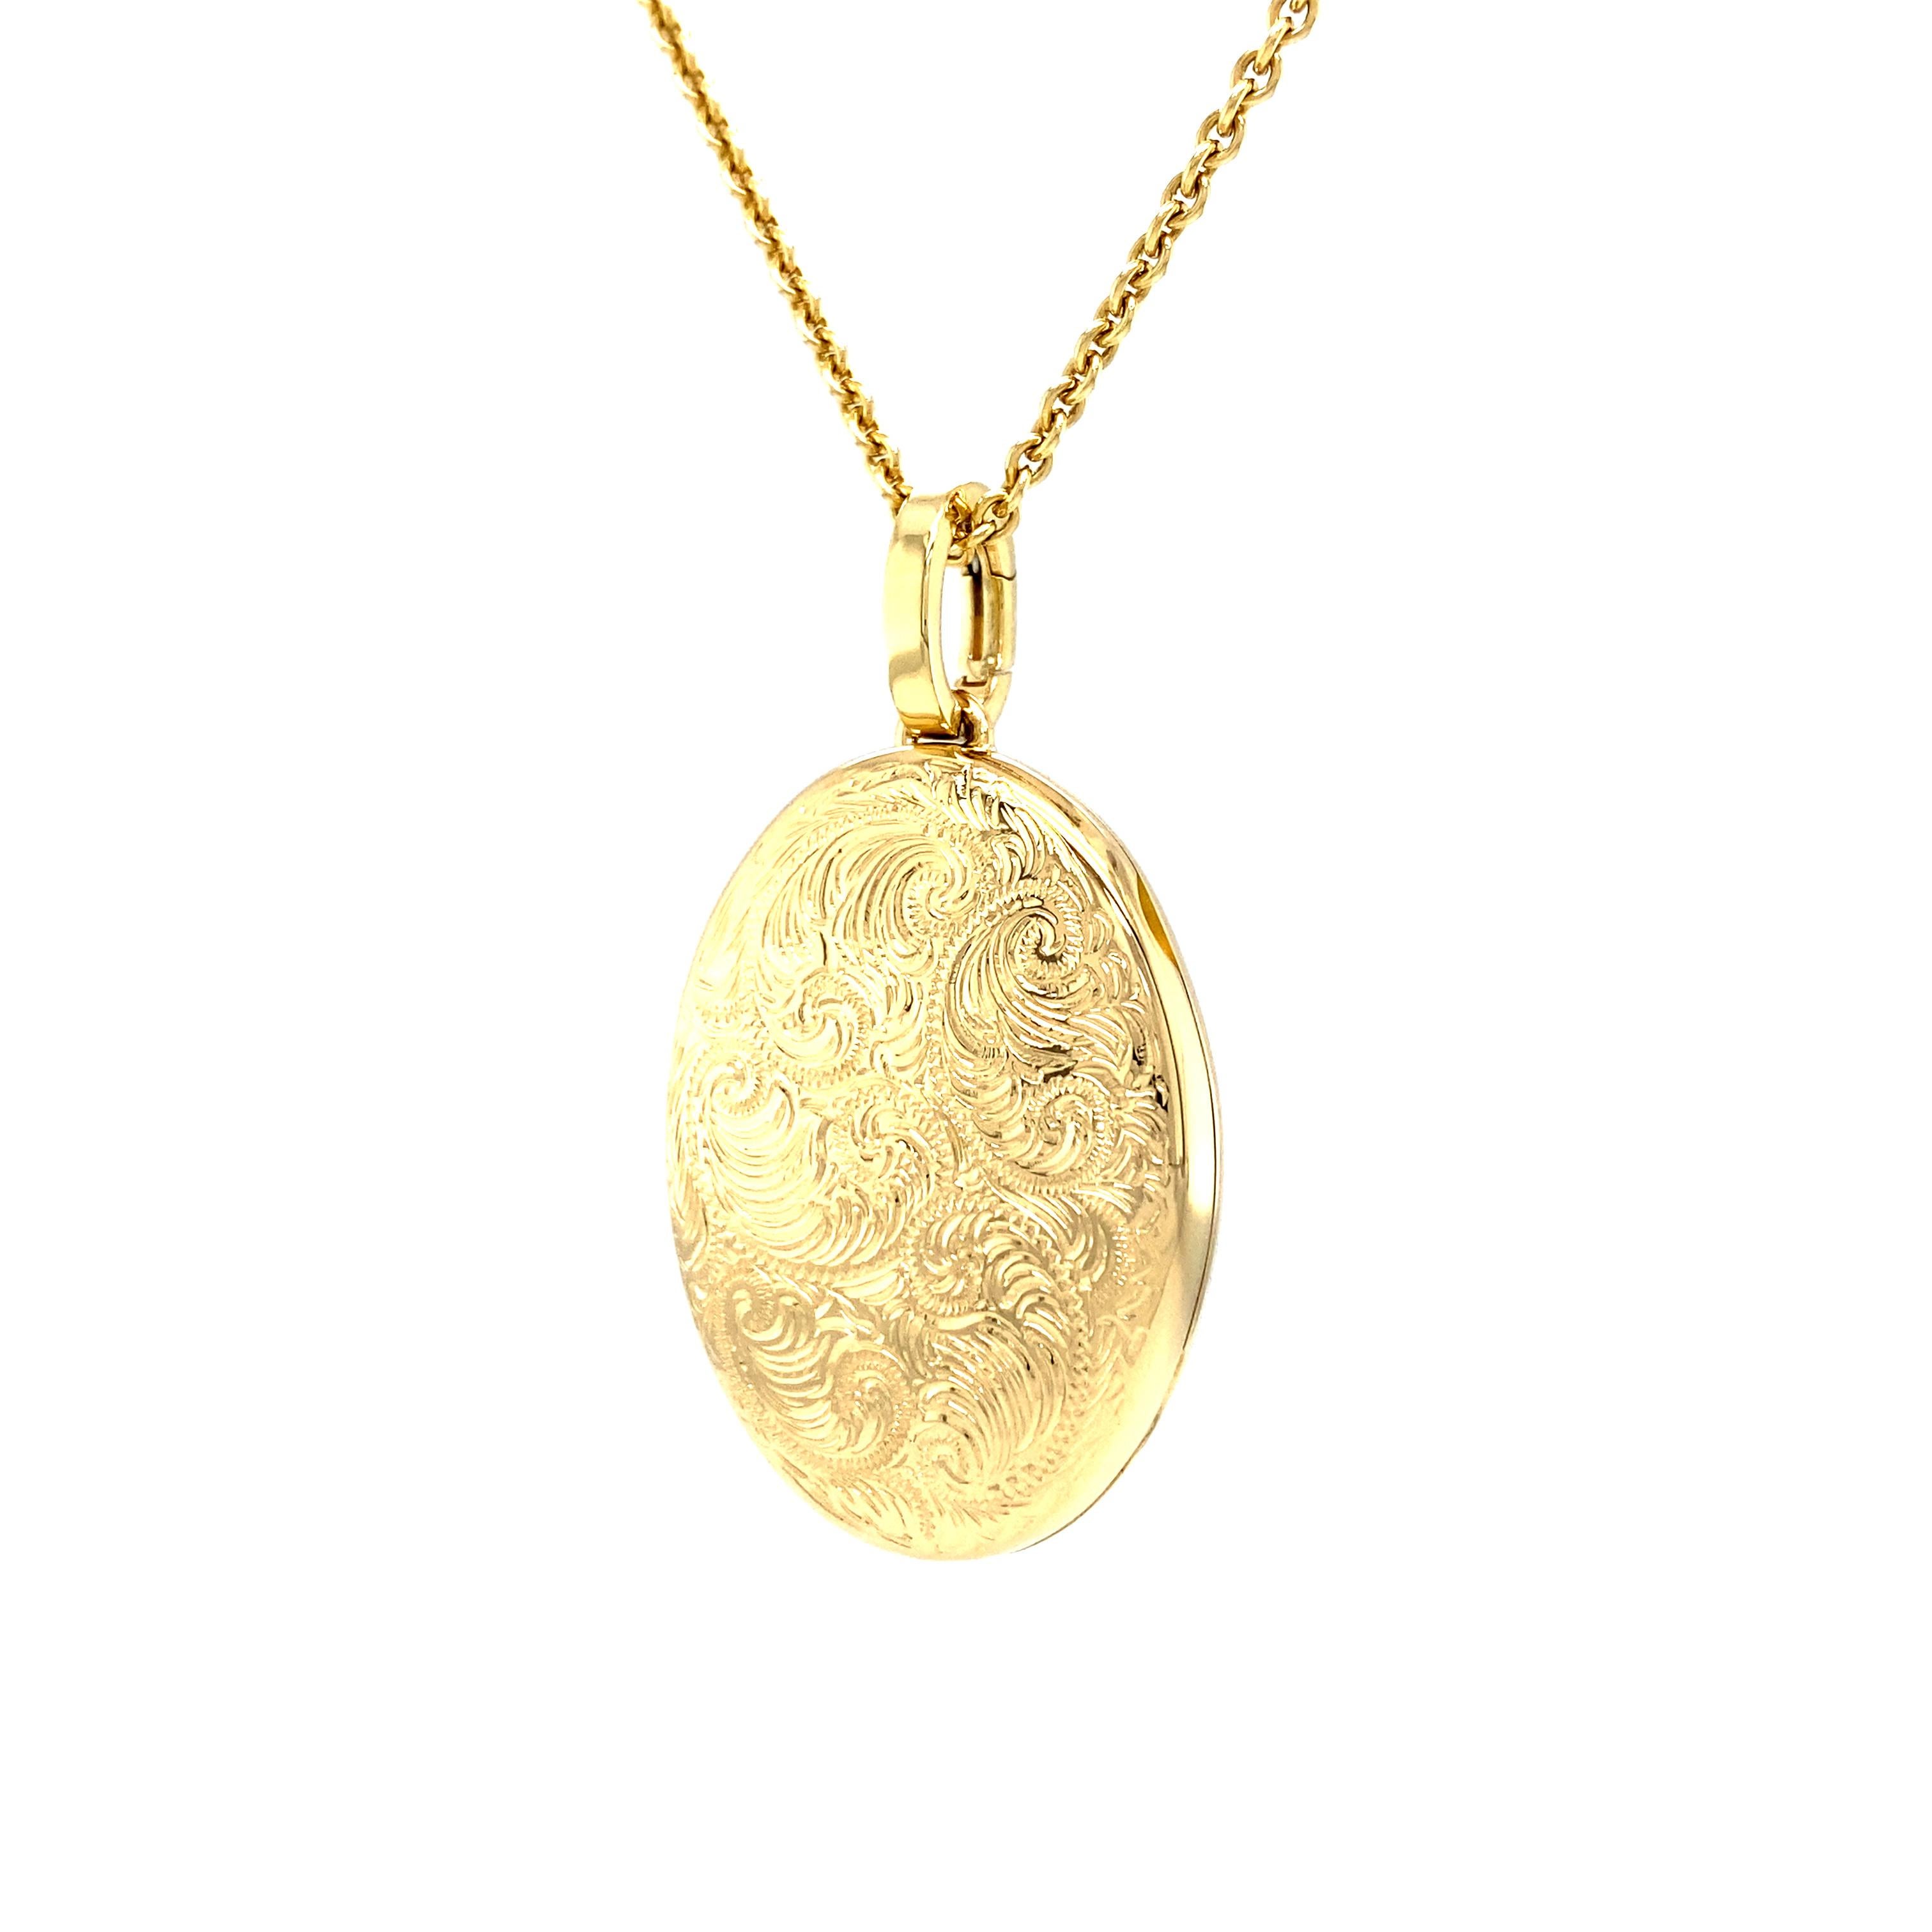 Oval Locket Pendant Necklace Scroll Engraving 18k Yellow Gold 23.0 x 32.0 mm For Sale 2